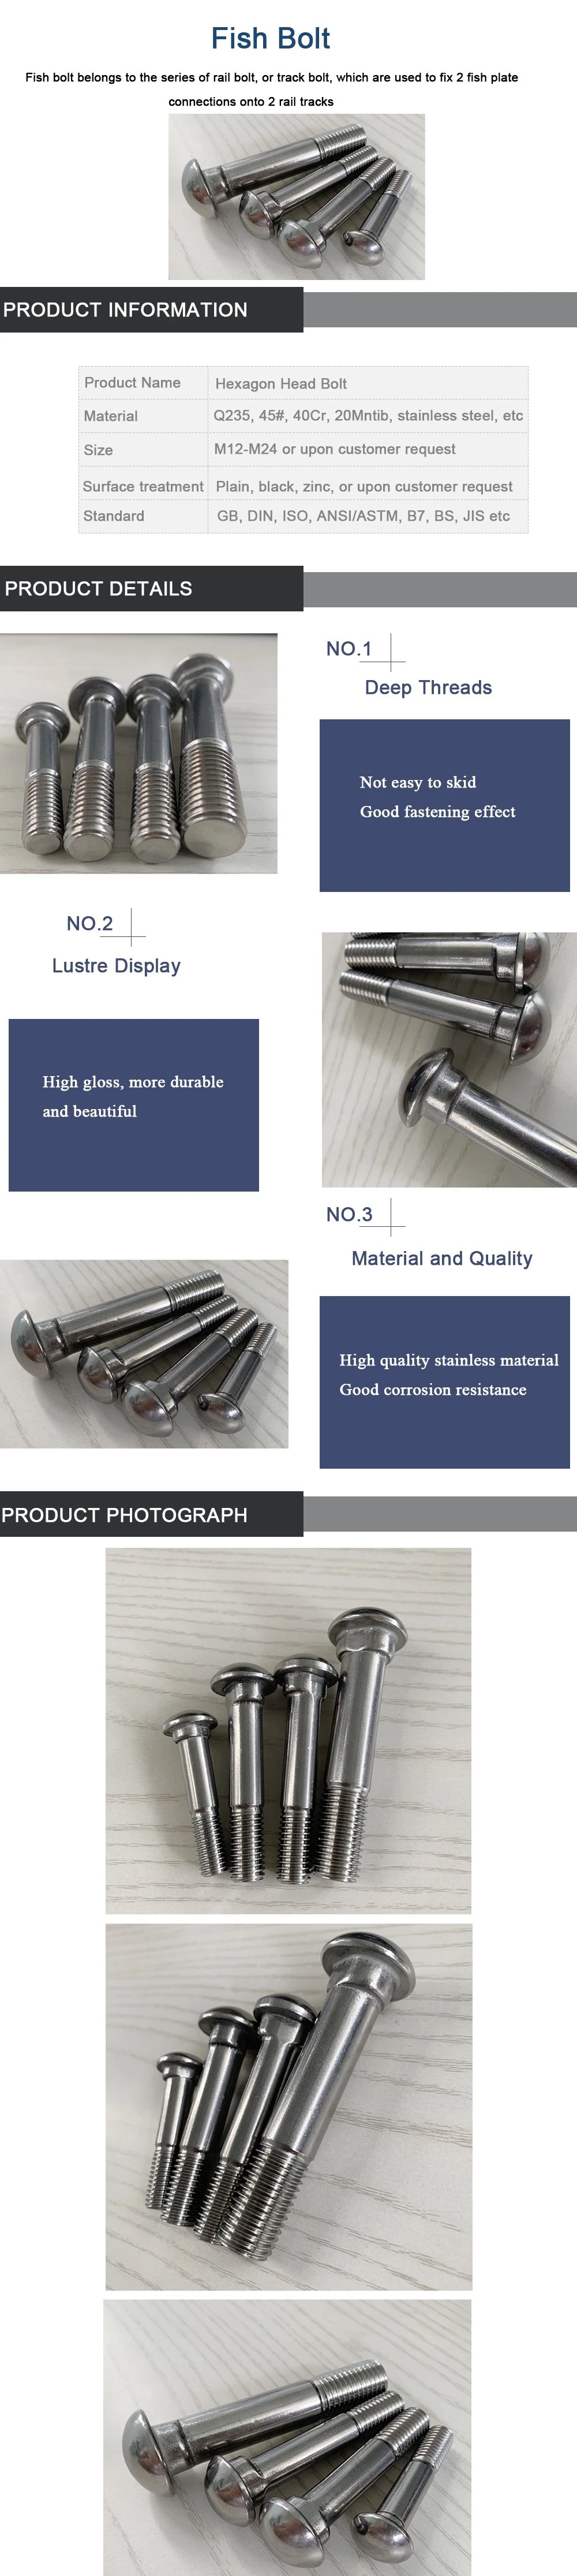 A2 A4 Stainless Steel Cup Oval Neck Bolt Railway Fishtail Bolt Railway Fish Plate Bolt Fish Bolt